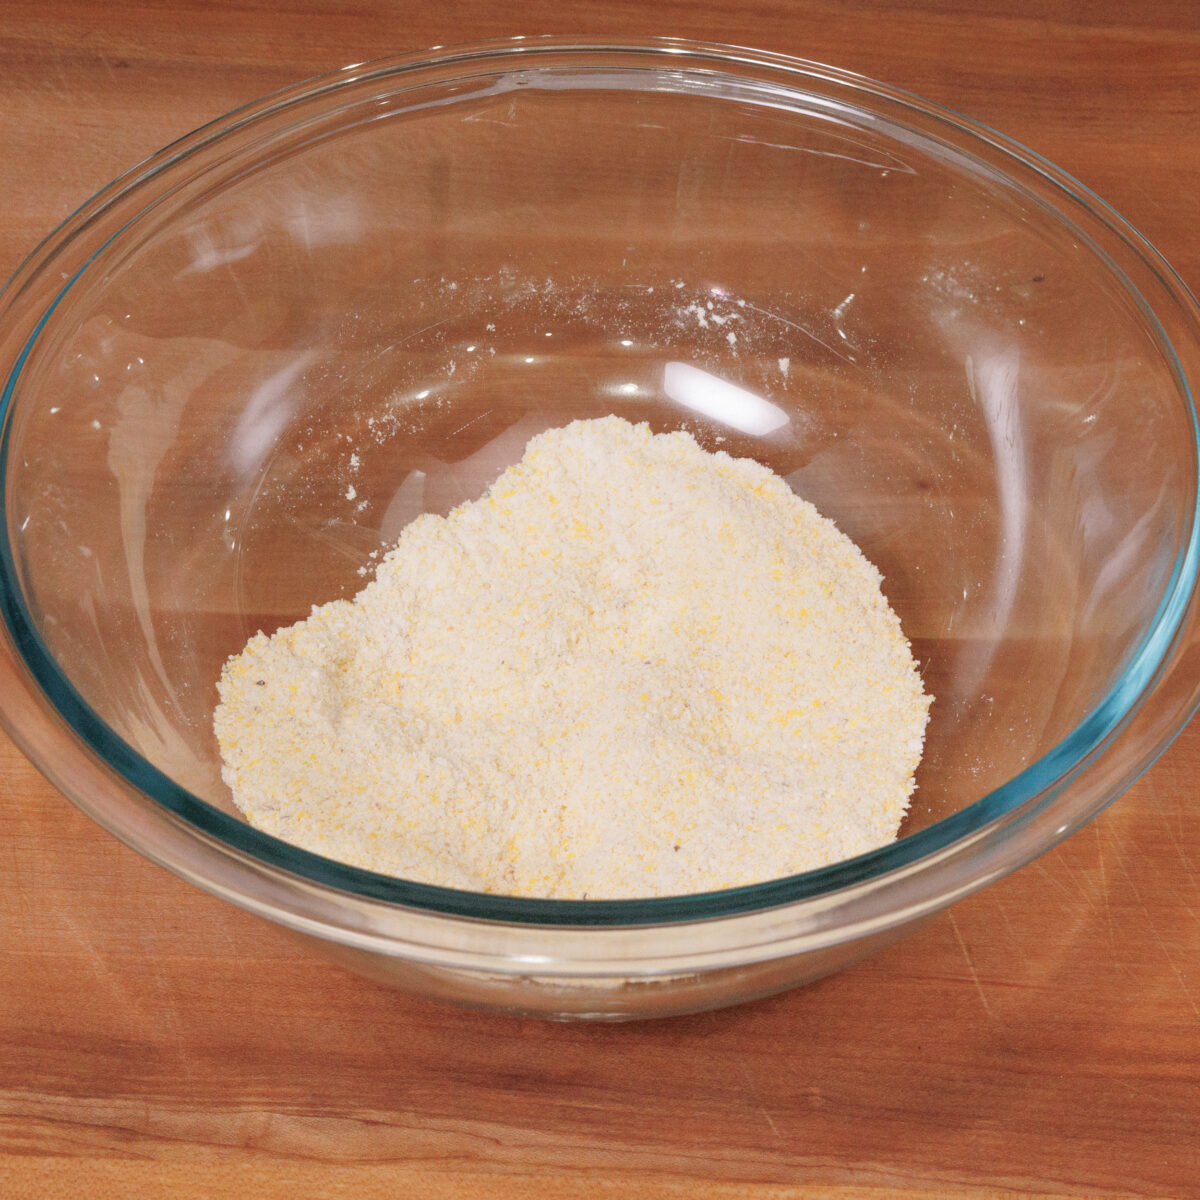 cornmeal, flour, sugar, and other ingredients needed to make hush puppies in a mixing bowl.